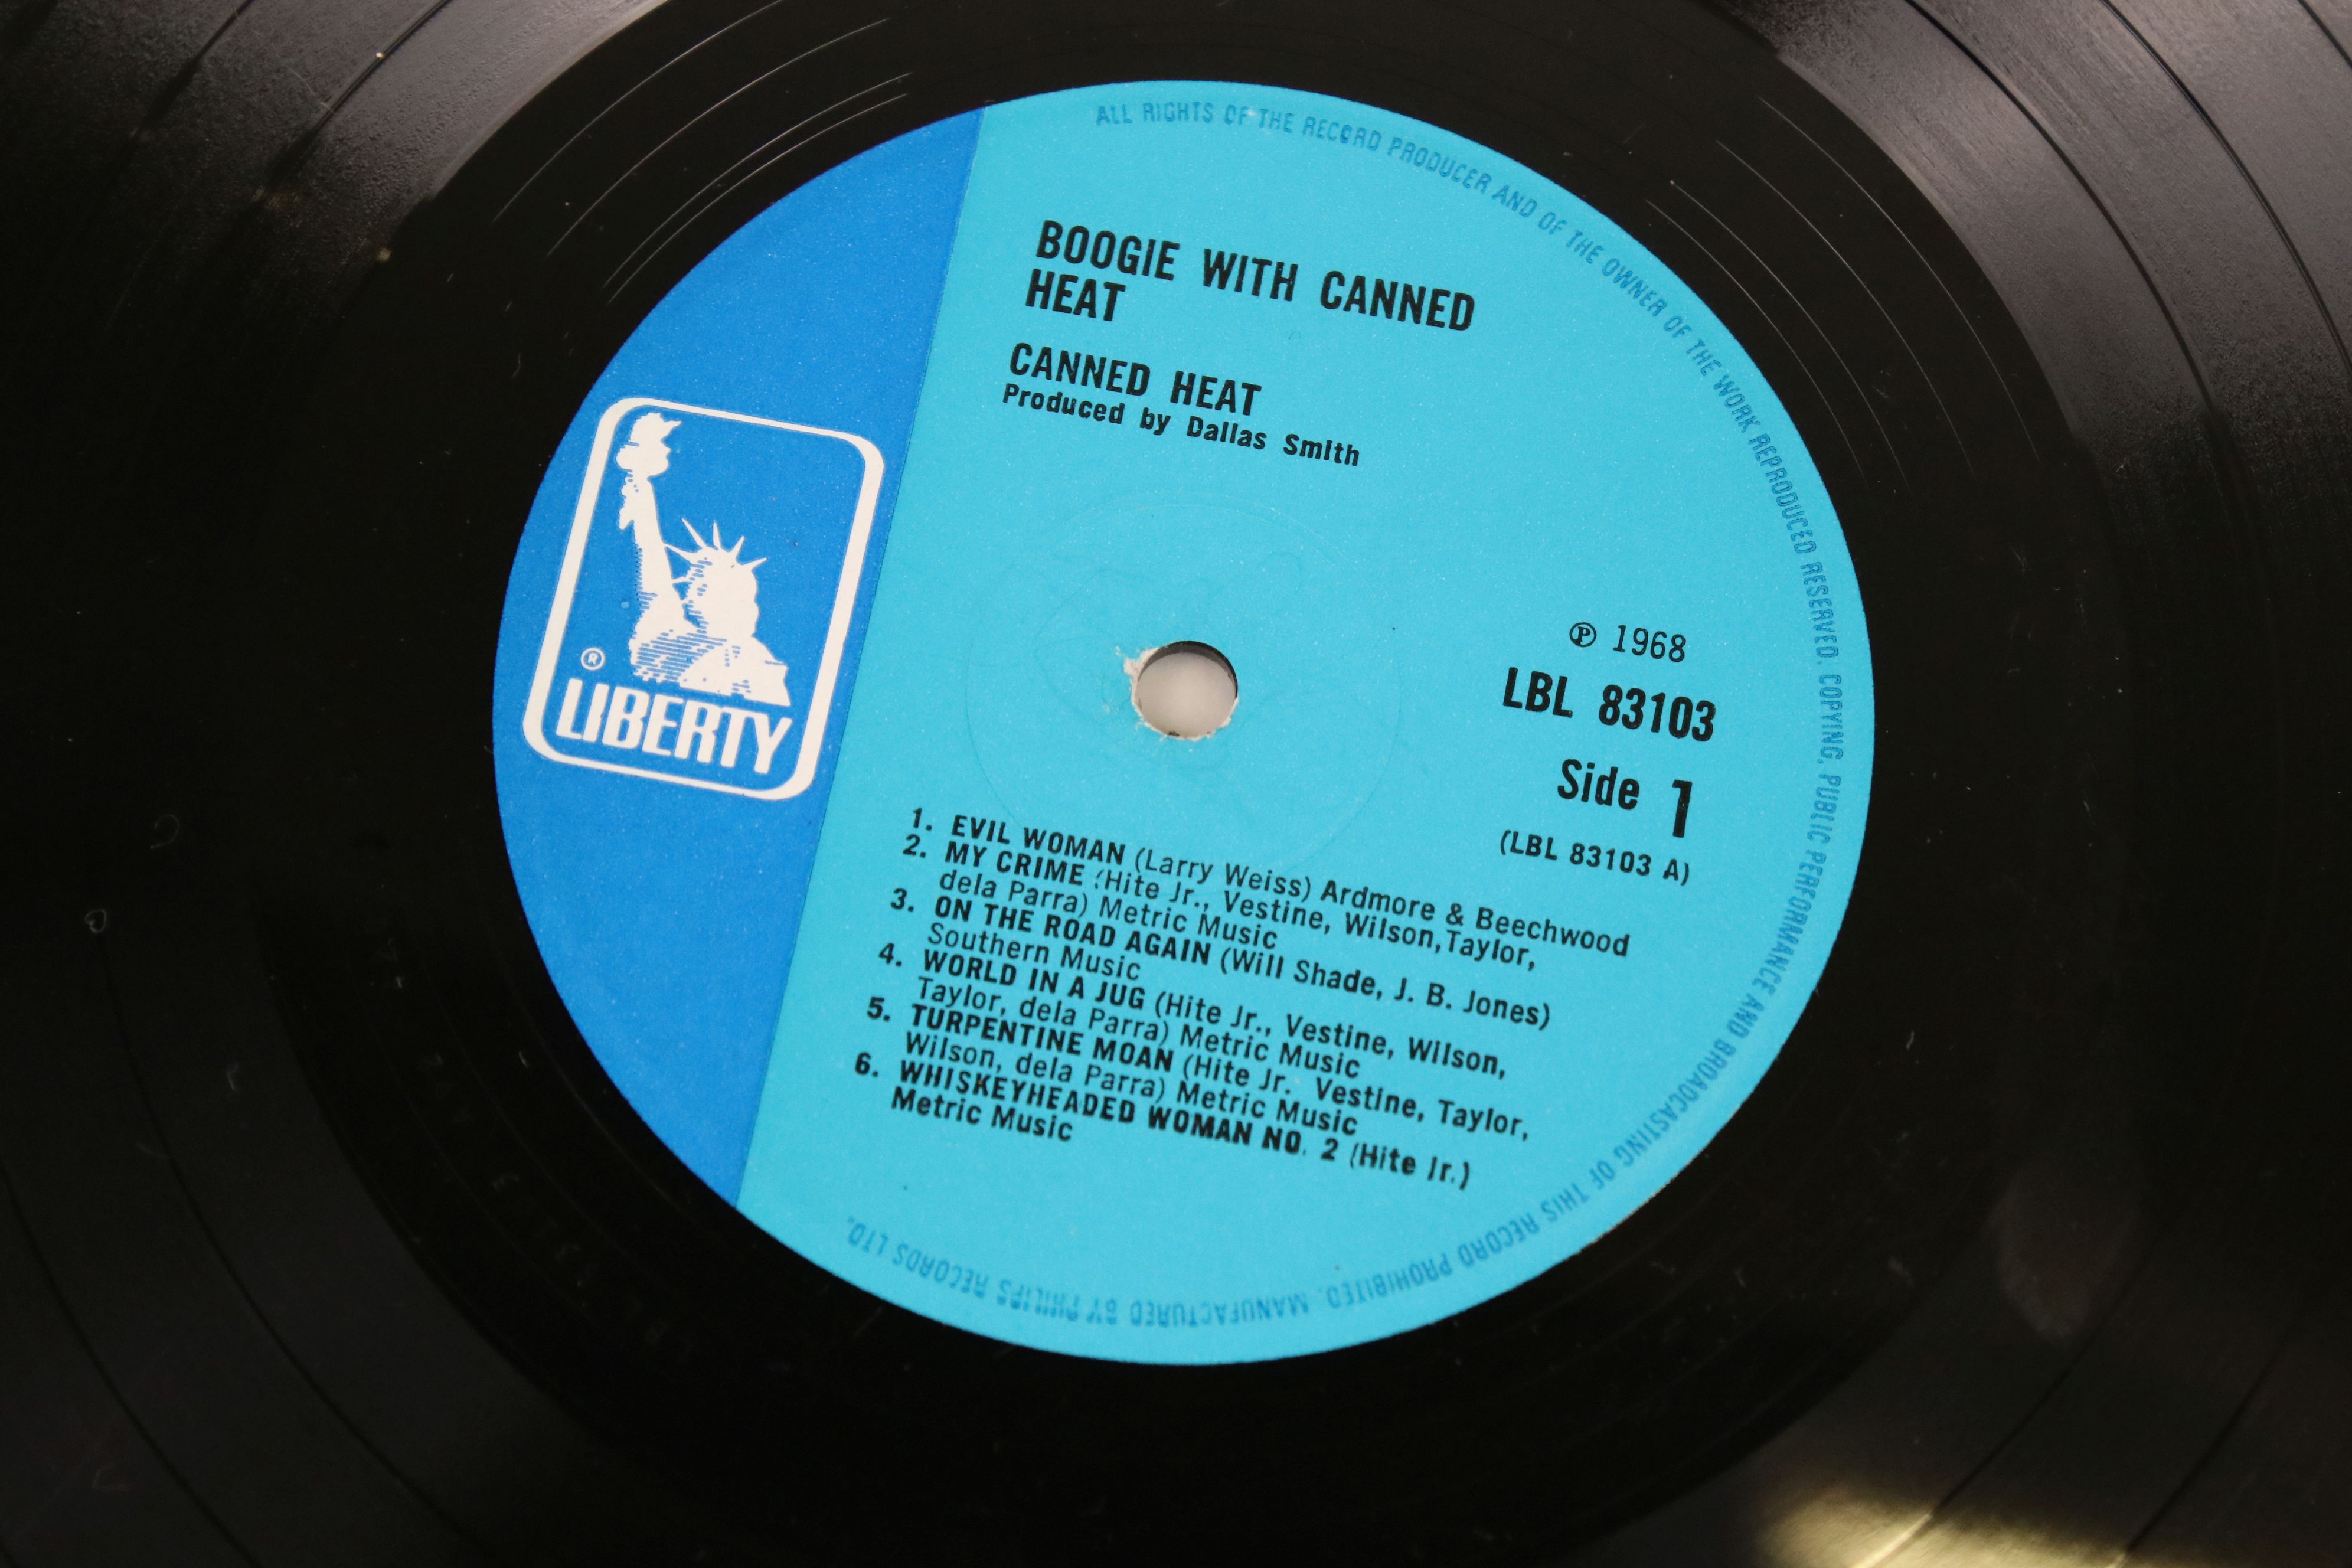 Vinyl - Canned Heat 3 LP's to include Boogie With Canned Heat x 2 (LBL 83103 & LBS 83103 mono & - Image 7 of 9